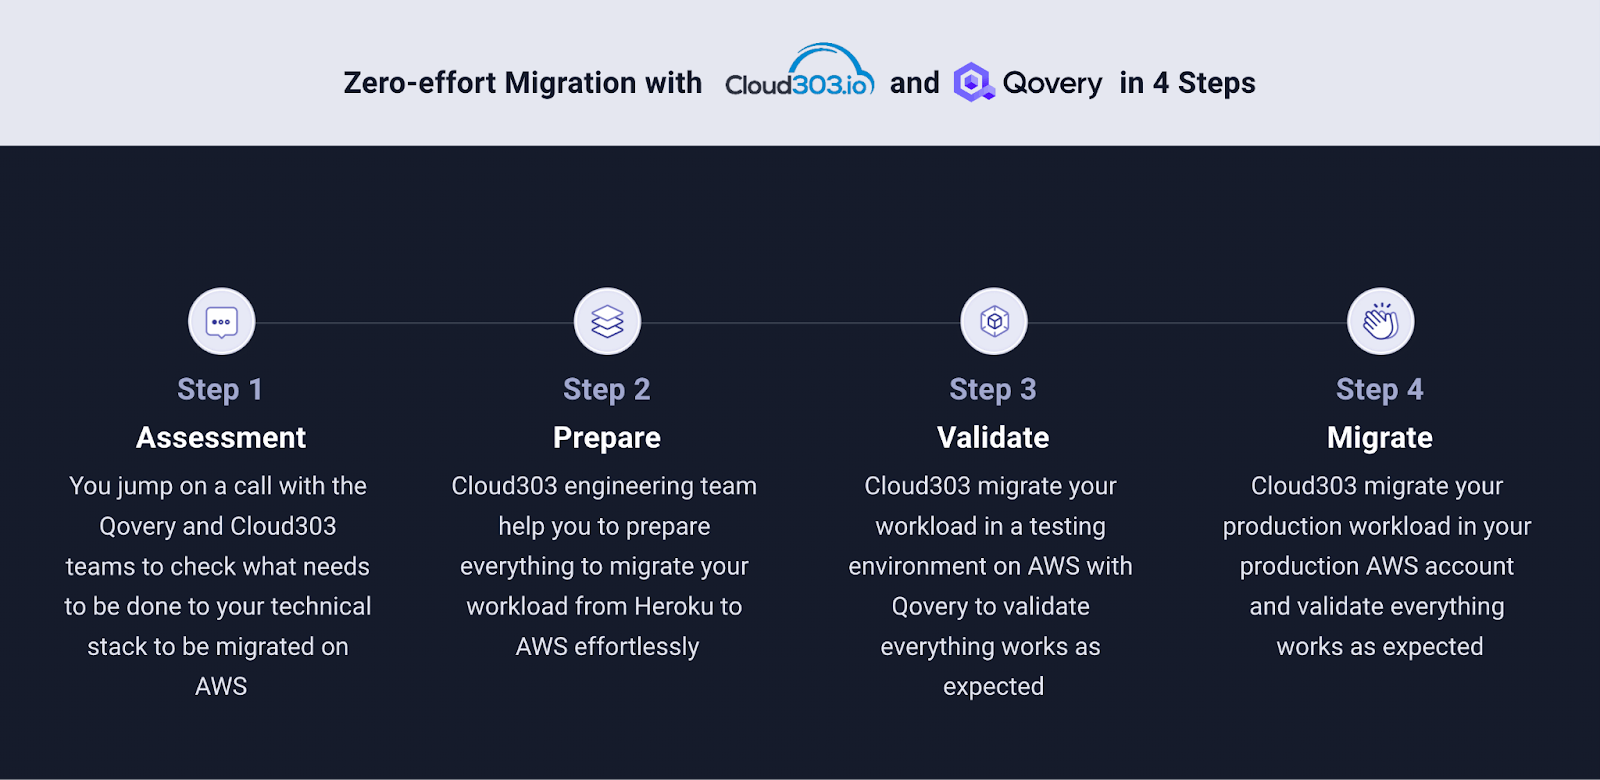 4 steps migration process with Cloud303 and Qovery